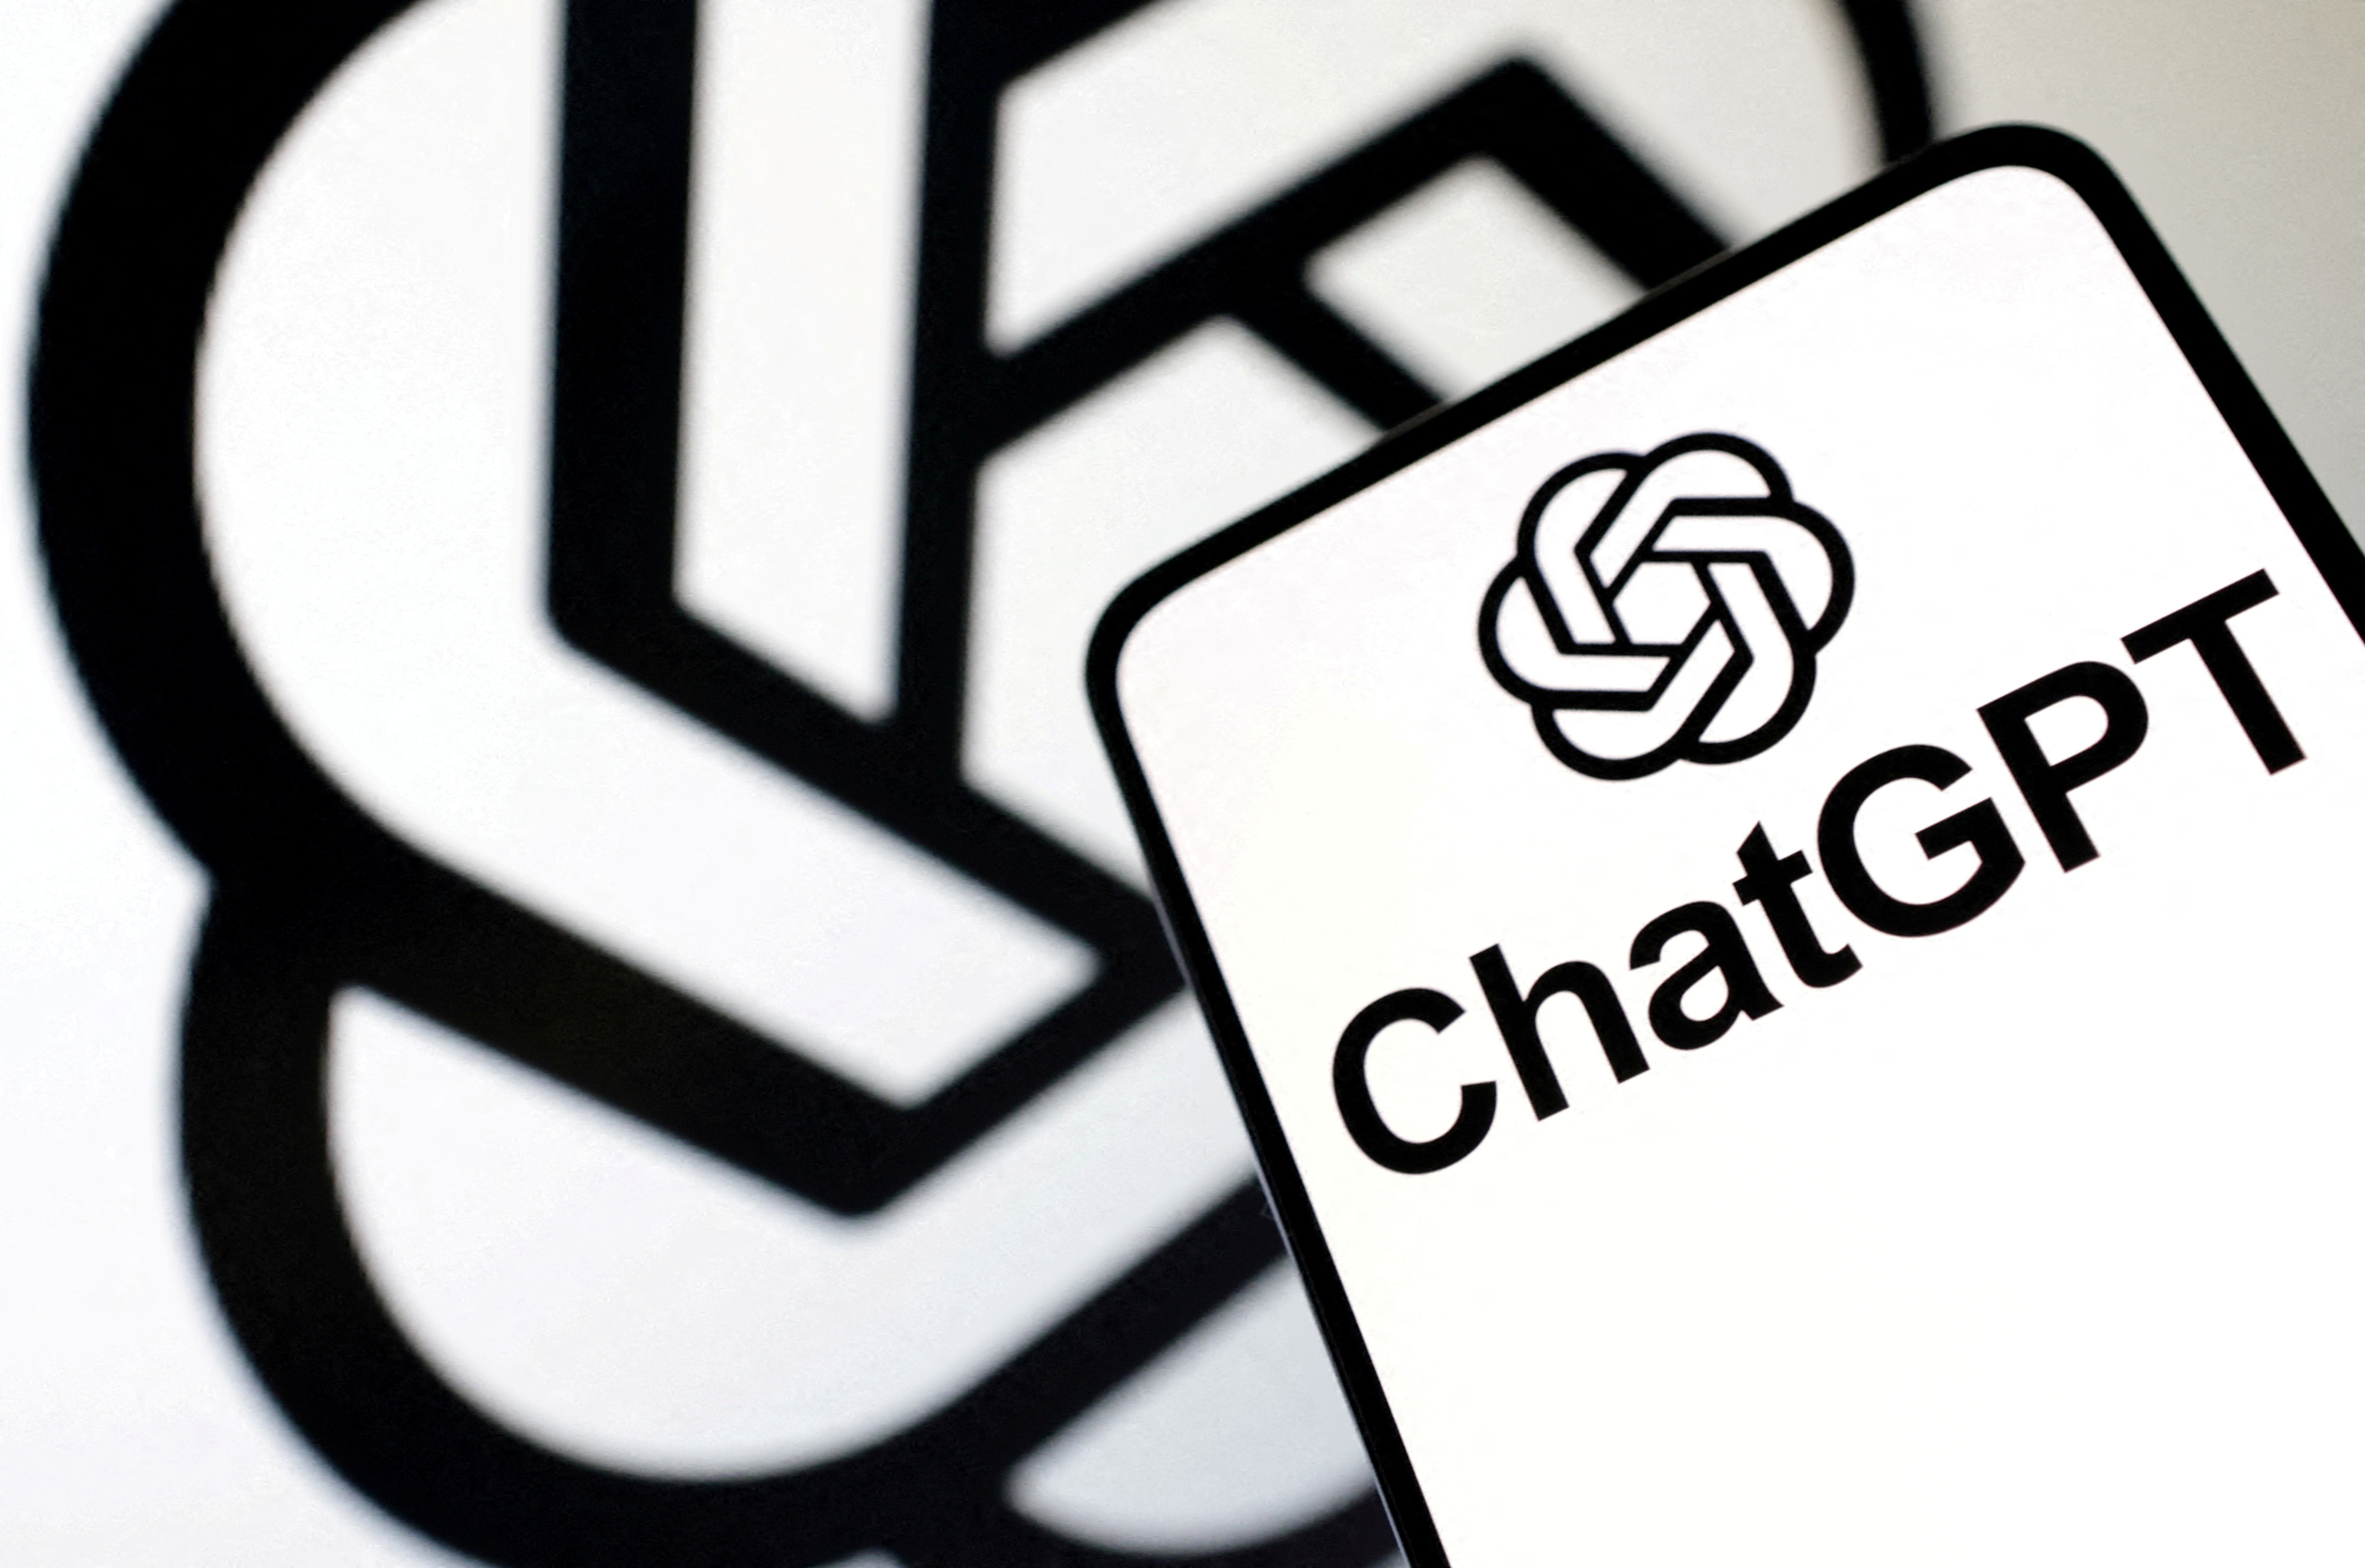 The image shows the ChatGPT logo